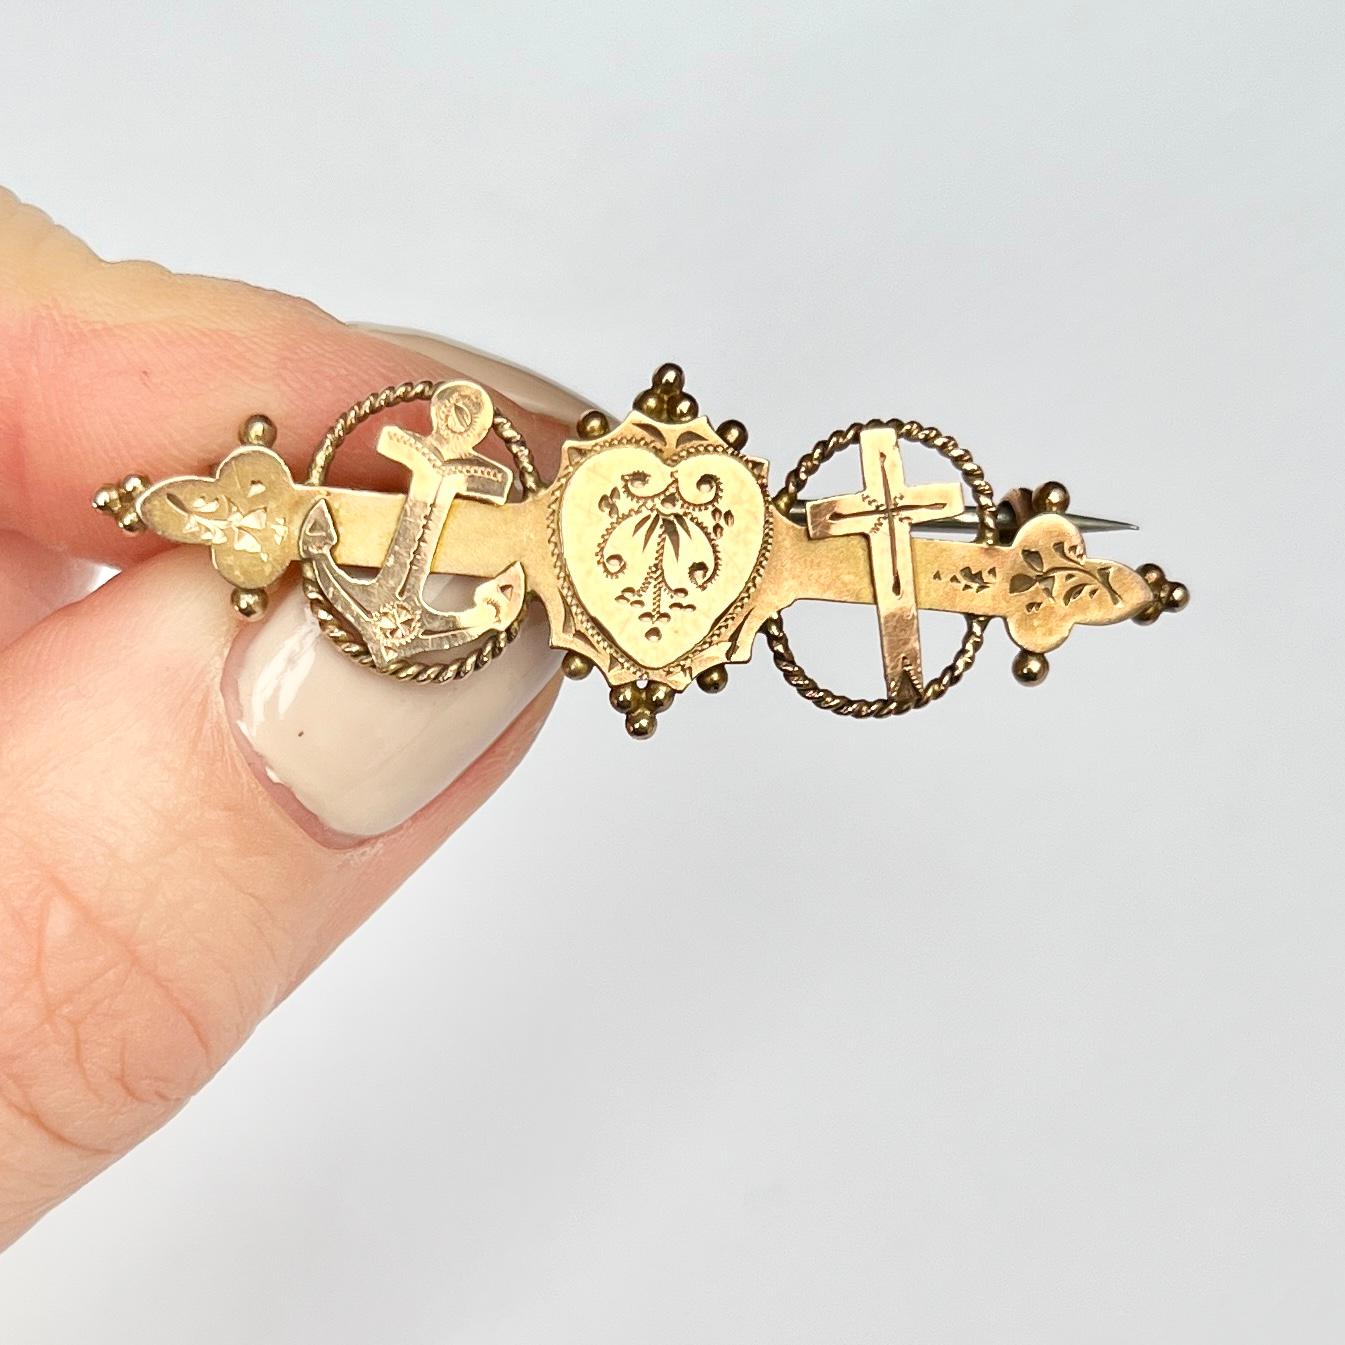 This gorgeous victorian brooch holds an anchor, heart and cross. this stands for Faith, hope and charity. 

Brooch Dimensions: 46x15mm

Weight: 2.2g